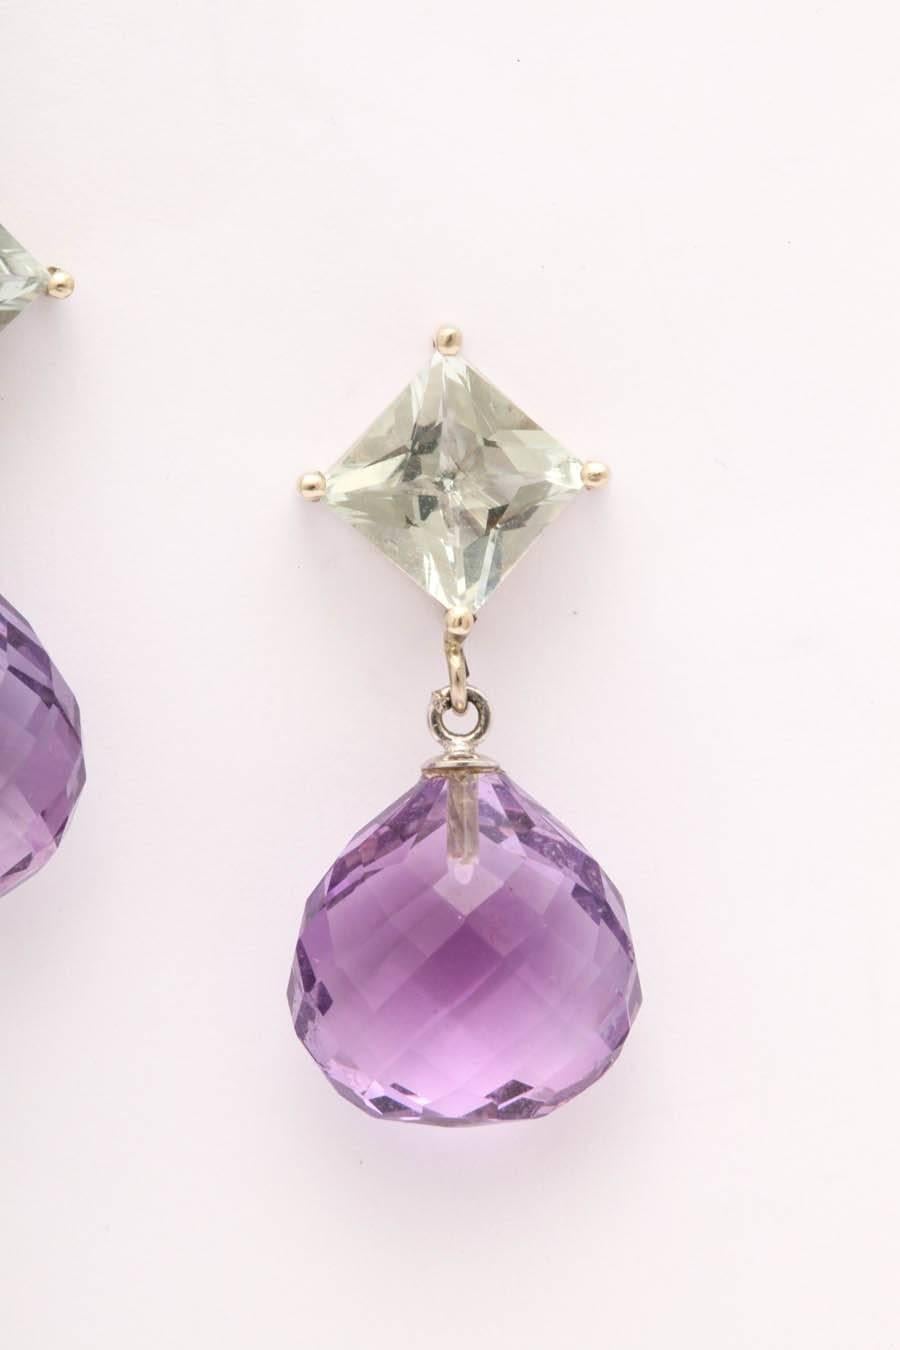 Set in 14 kt white gold to show the true soft colors of both types of amethyst. These earrings sit and swing beautifully on the ear. Great for upcoming spring fashions. The green amethyst is 8 mm square French cut, the green color doesn't show up in